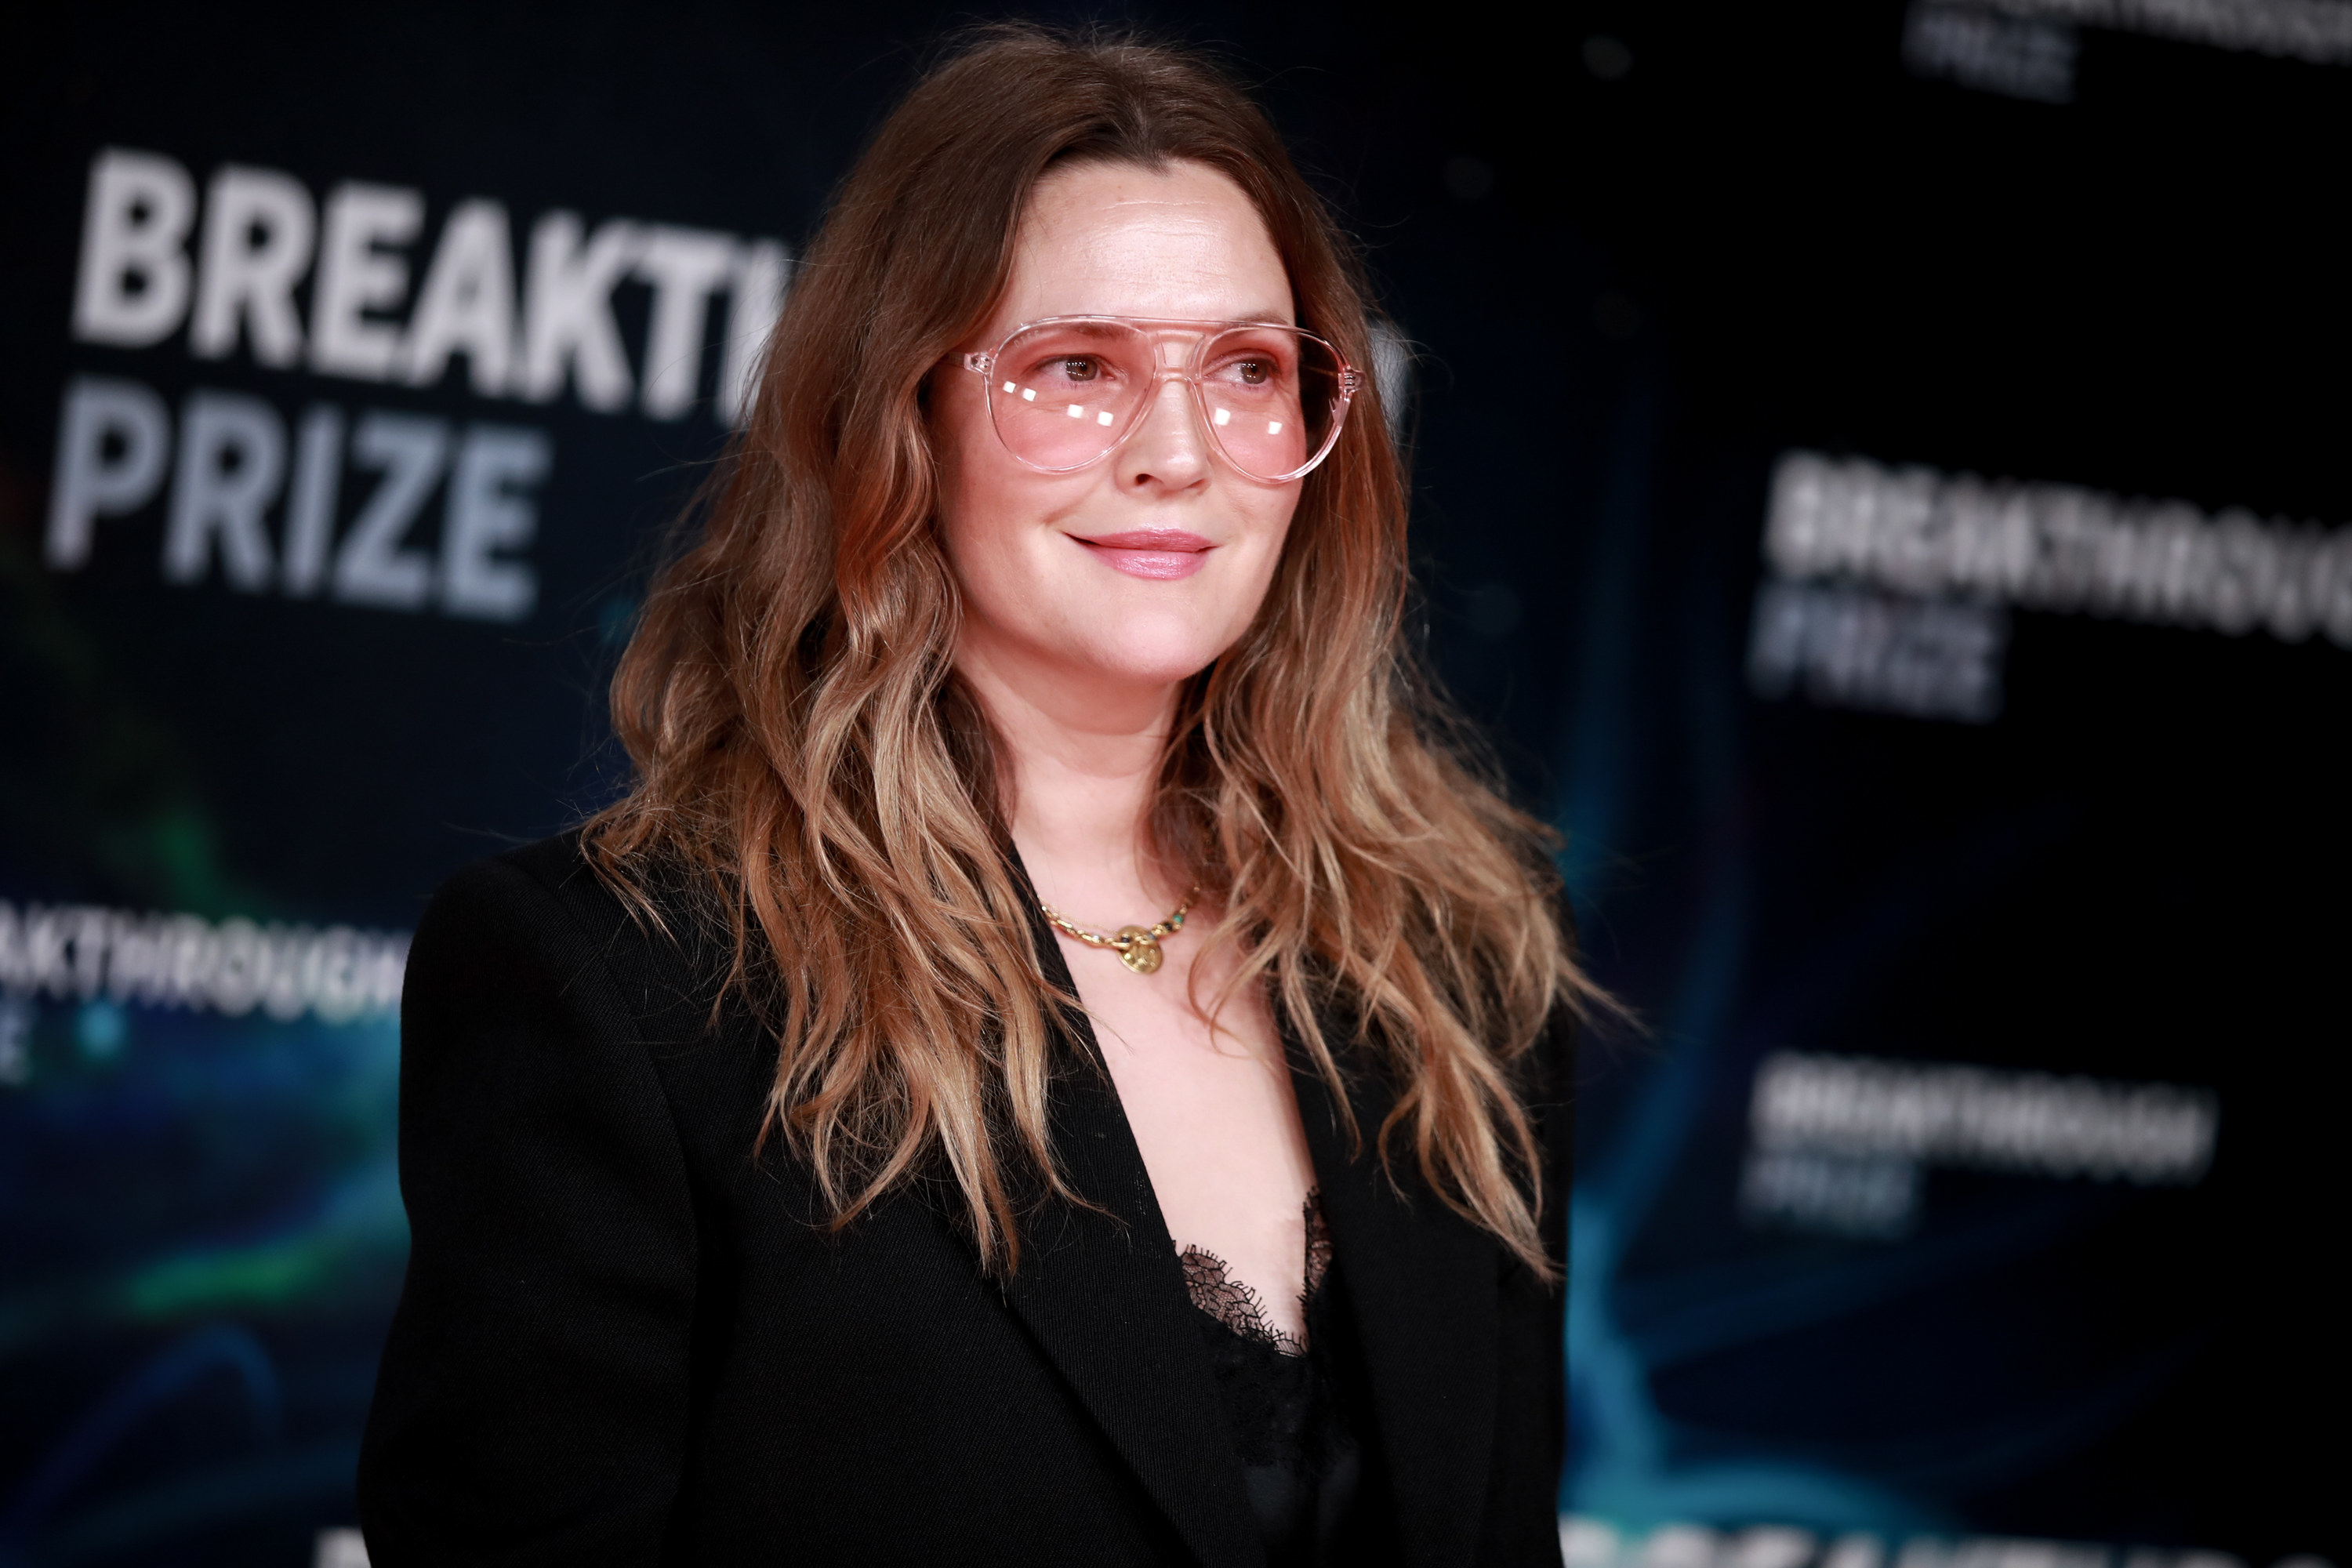 Drew Barrymore at the 8th Annual Breakthrough Prize Ceremony at NASA Ames Research Center